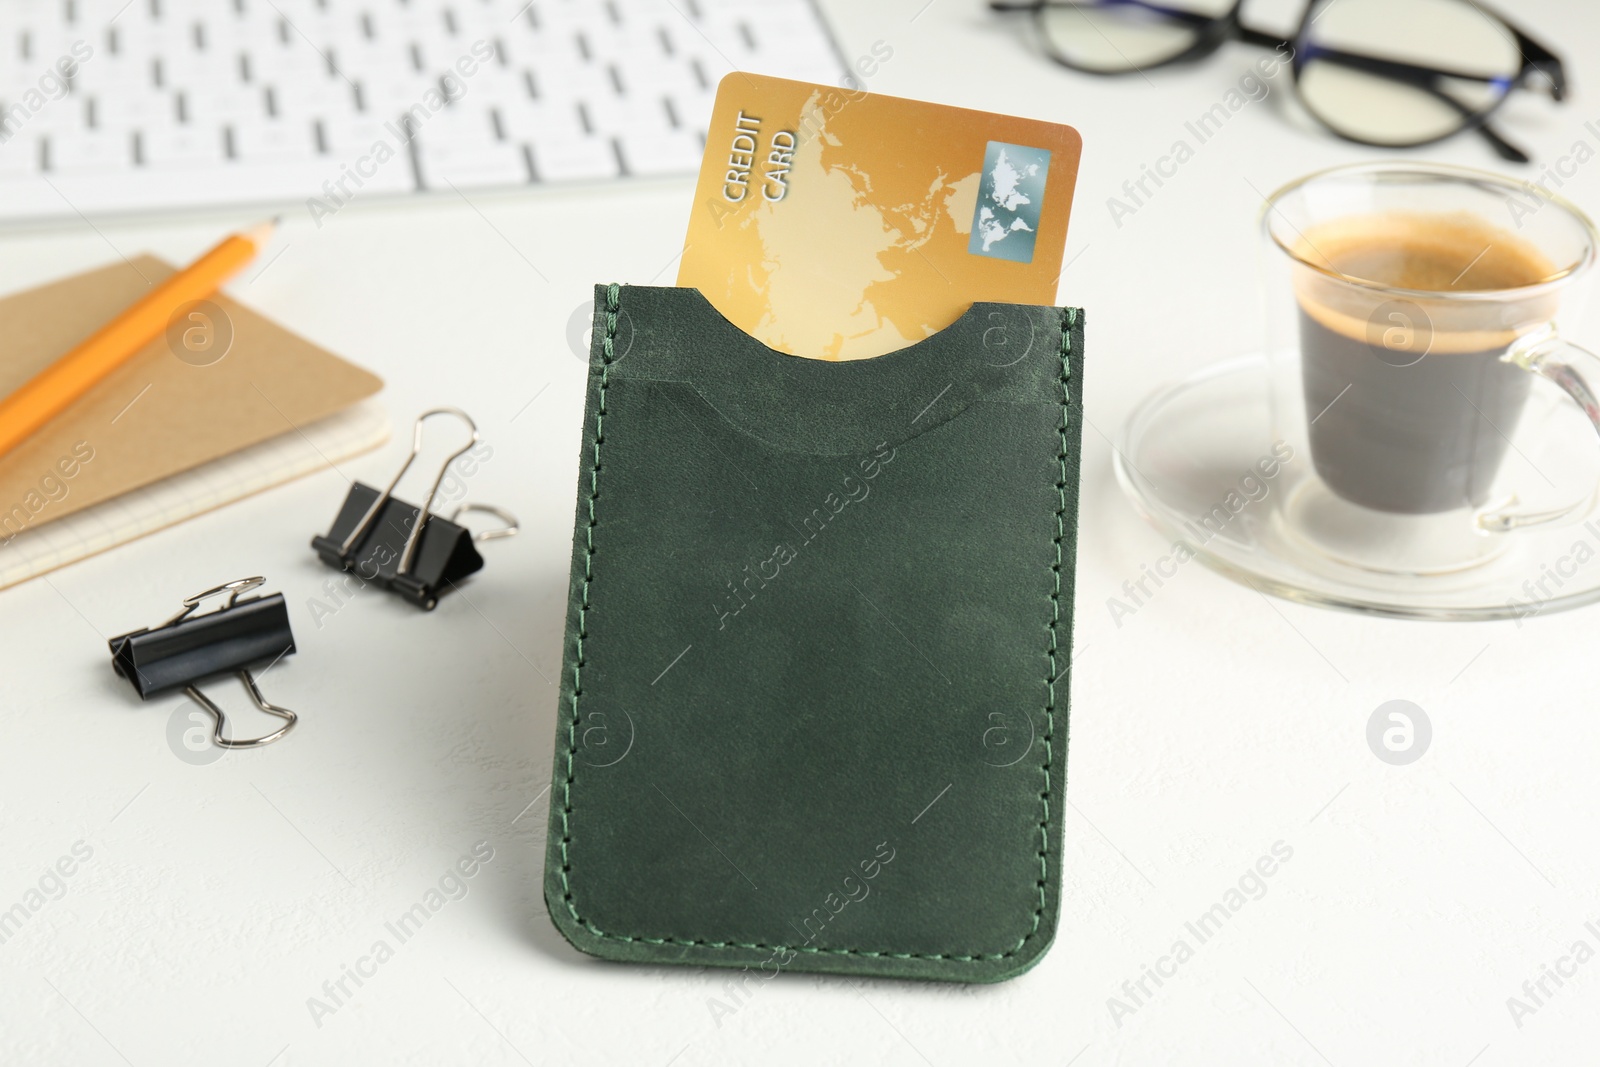 Photo of Leather card holder with credit card, stationery, coffee and keyboard on white table